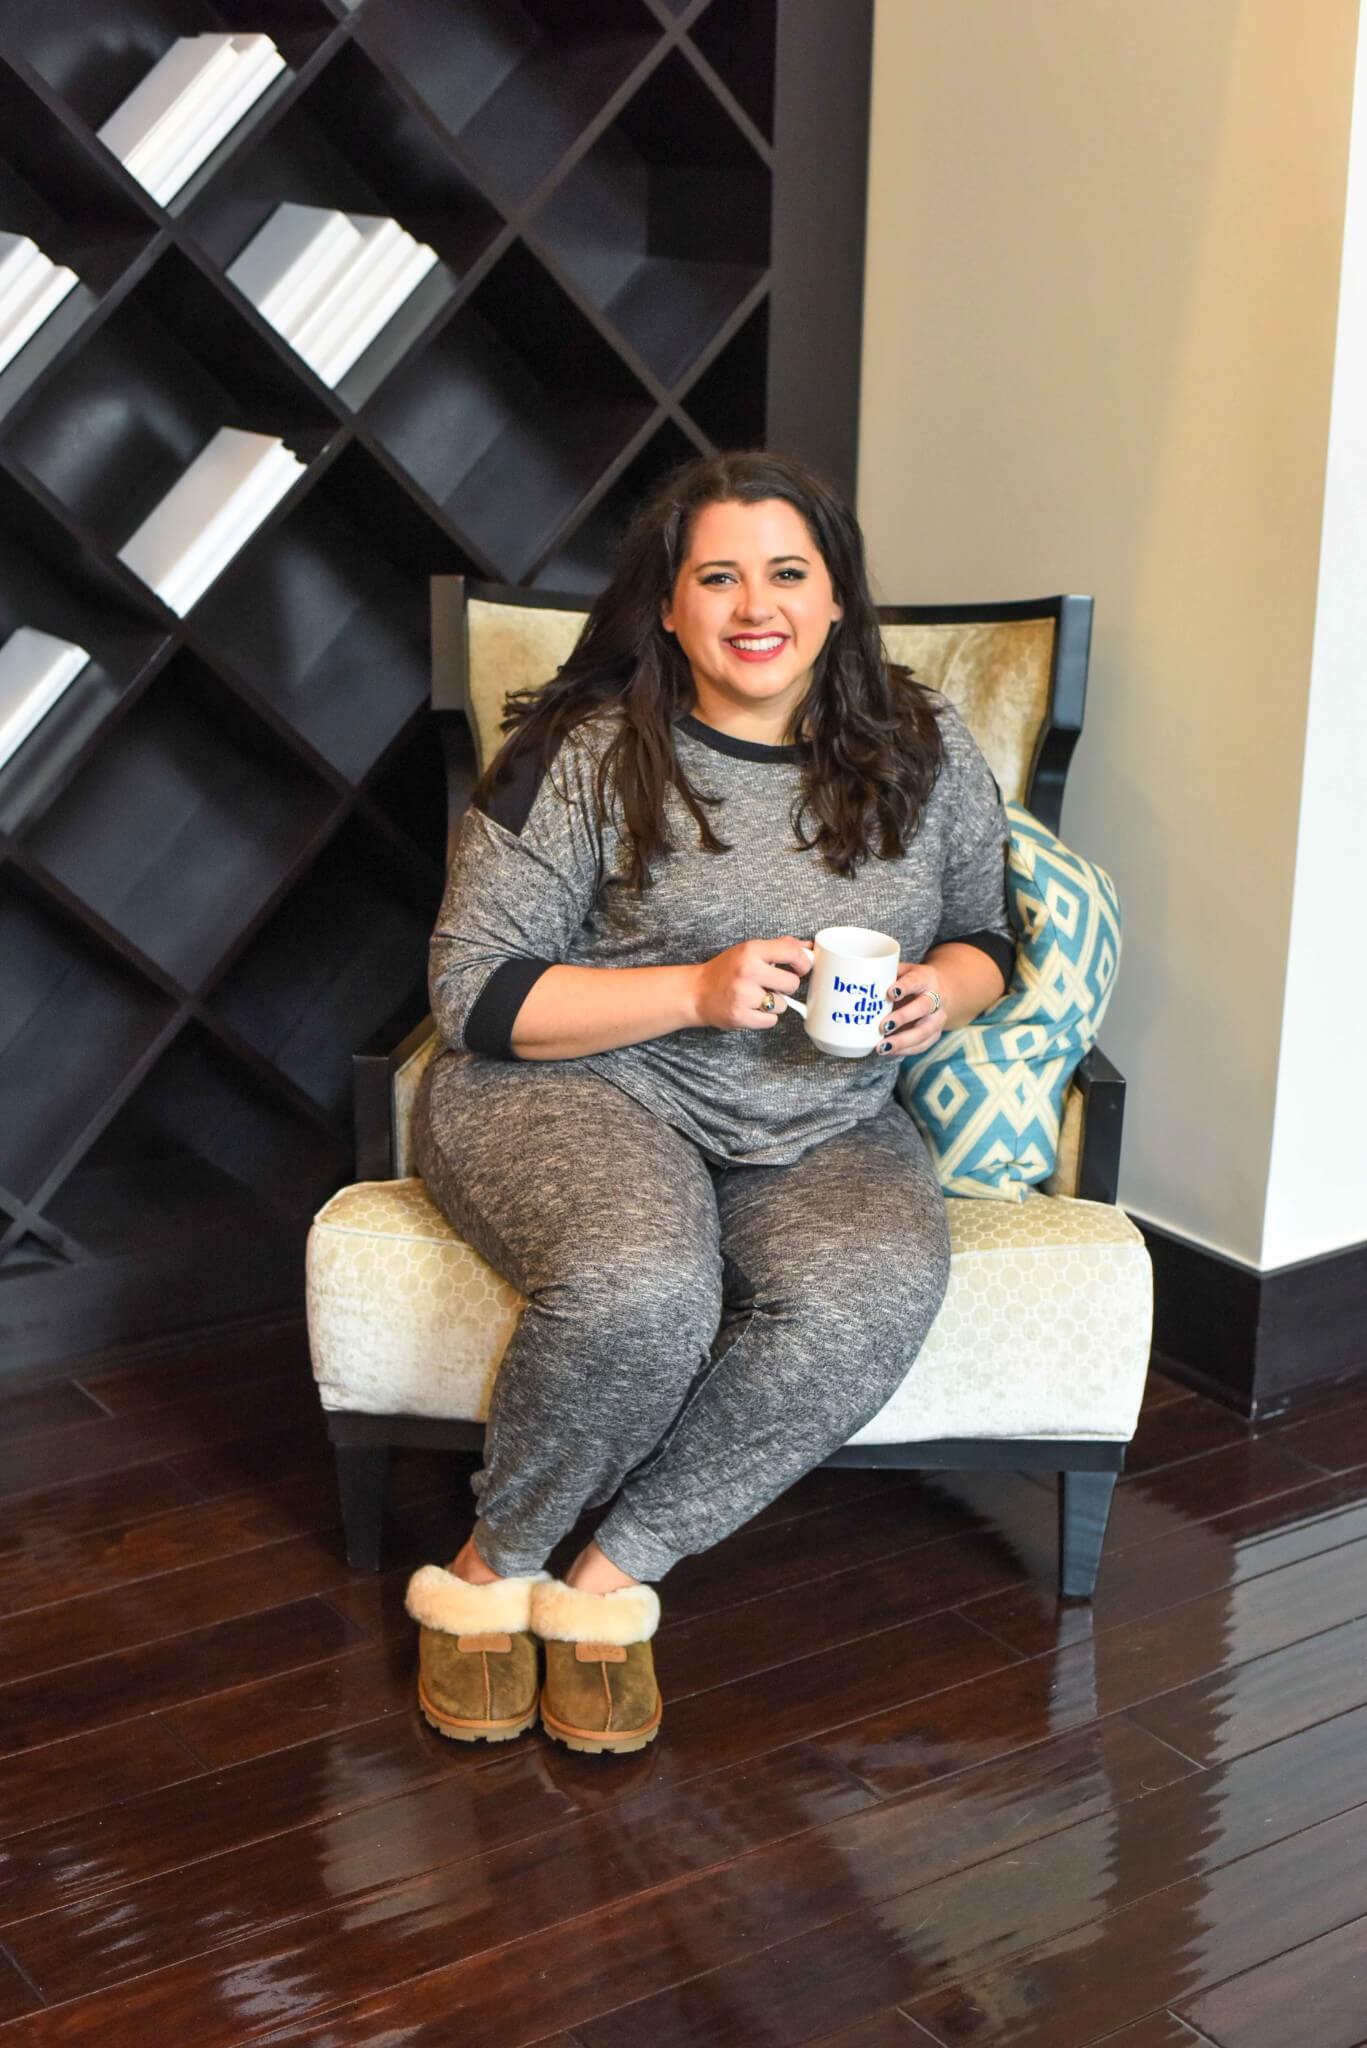 Enjoying a cup of coffee is one of the best ways to unwind on the weekend. Doing so in a great pair of PJs is the icing on the cake. I'm sharing why I love shopping at Kohl's for plus size pajamas. #plussize - Getting a Better Night's Sleep with Kohl's Plus Size Pajamas by popular Houston fashion blogger Something Gold, Something Blue